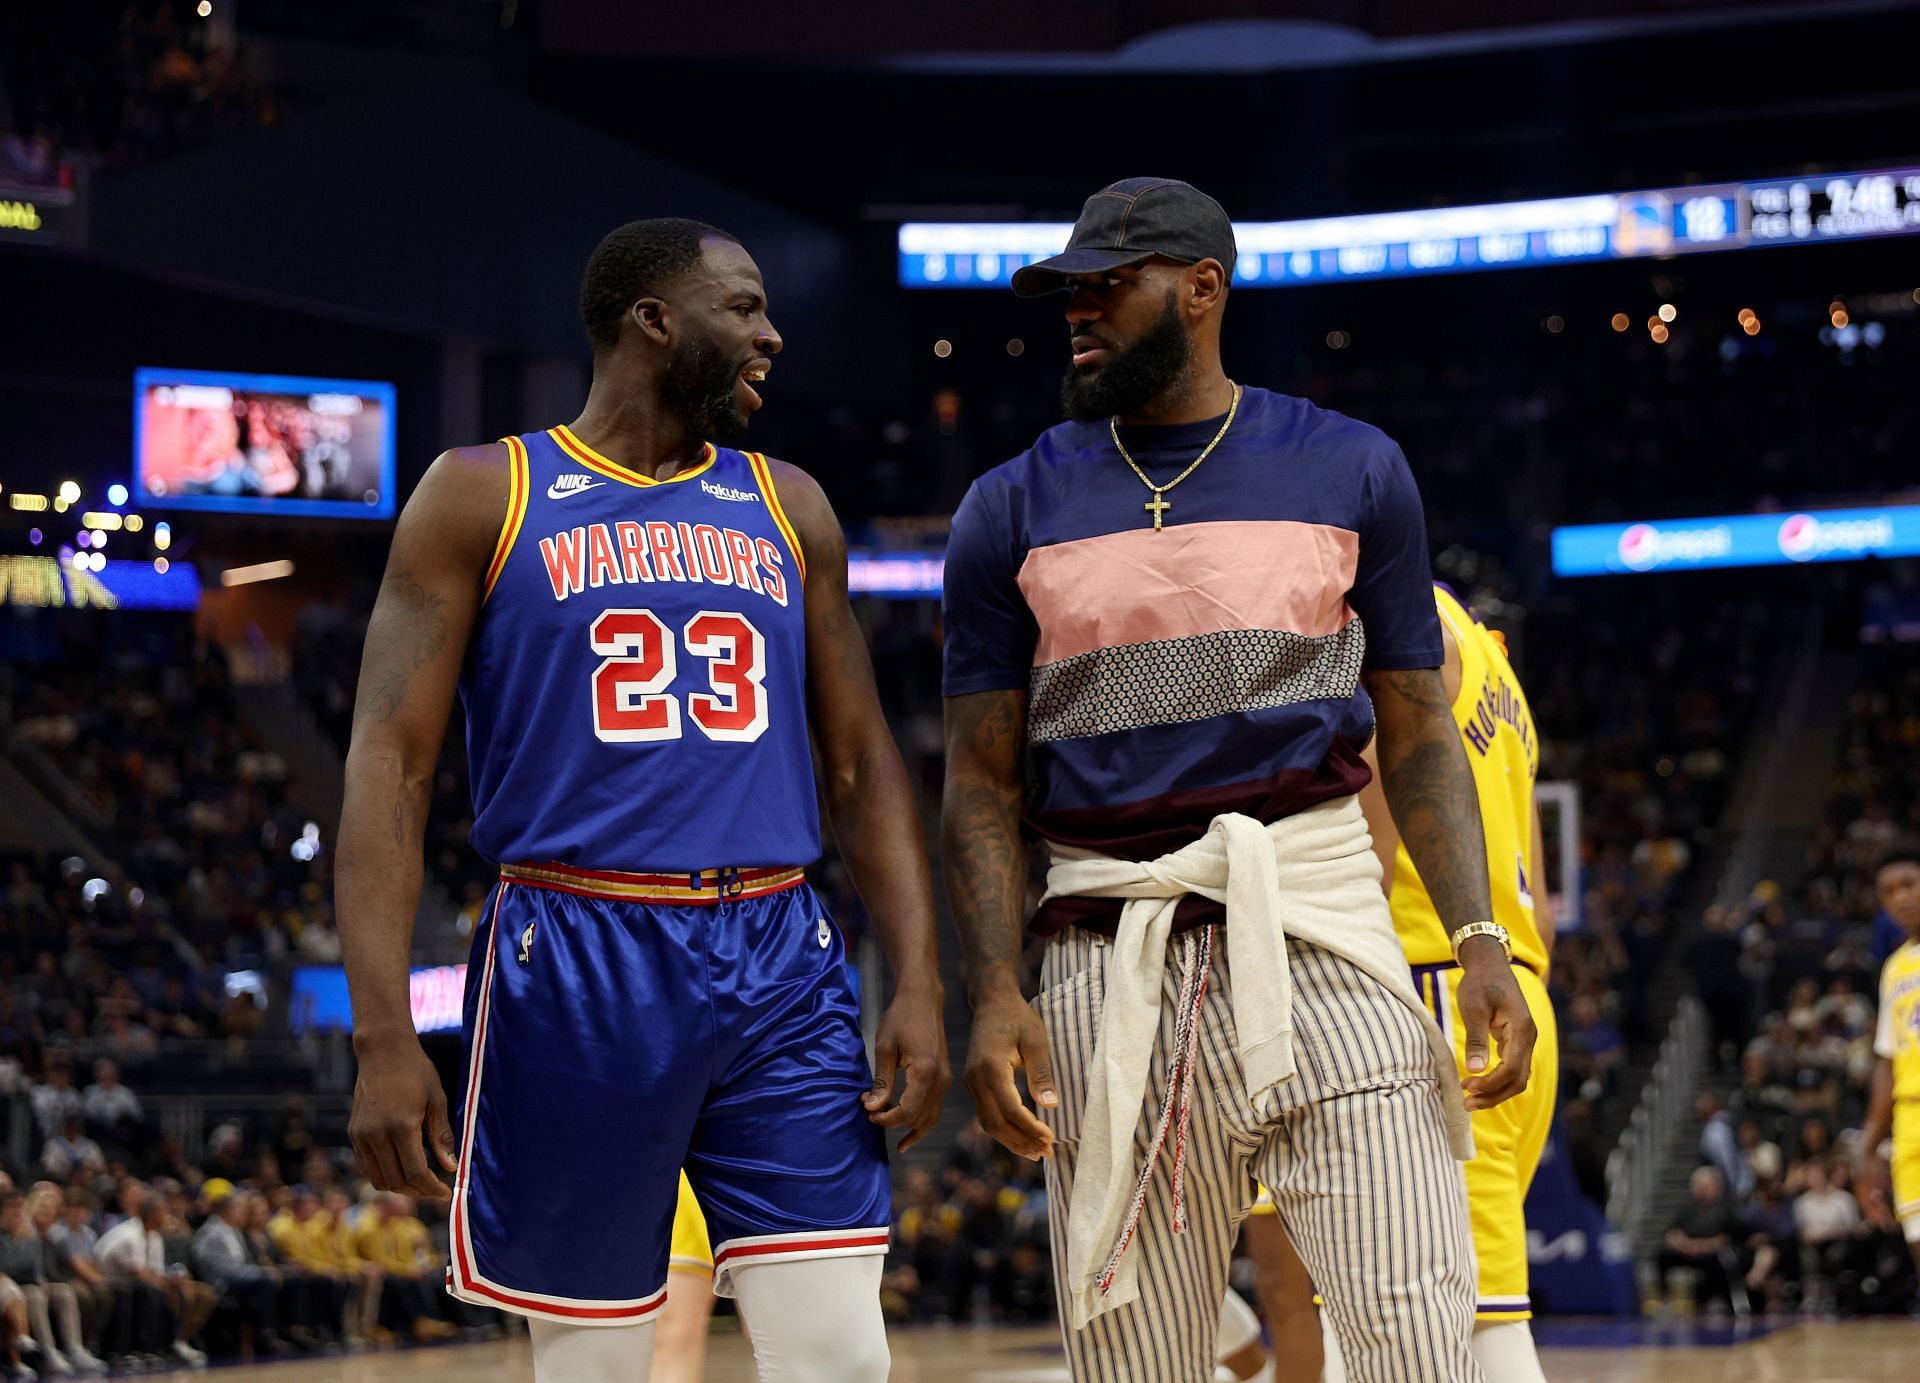 Draymond Green of the Golden State Warriors talks with LeBron James of the LA Lakers